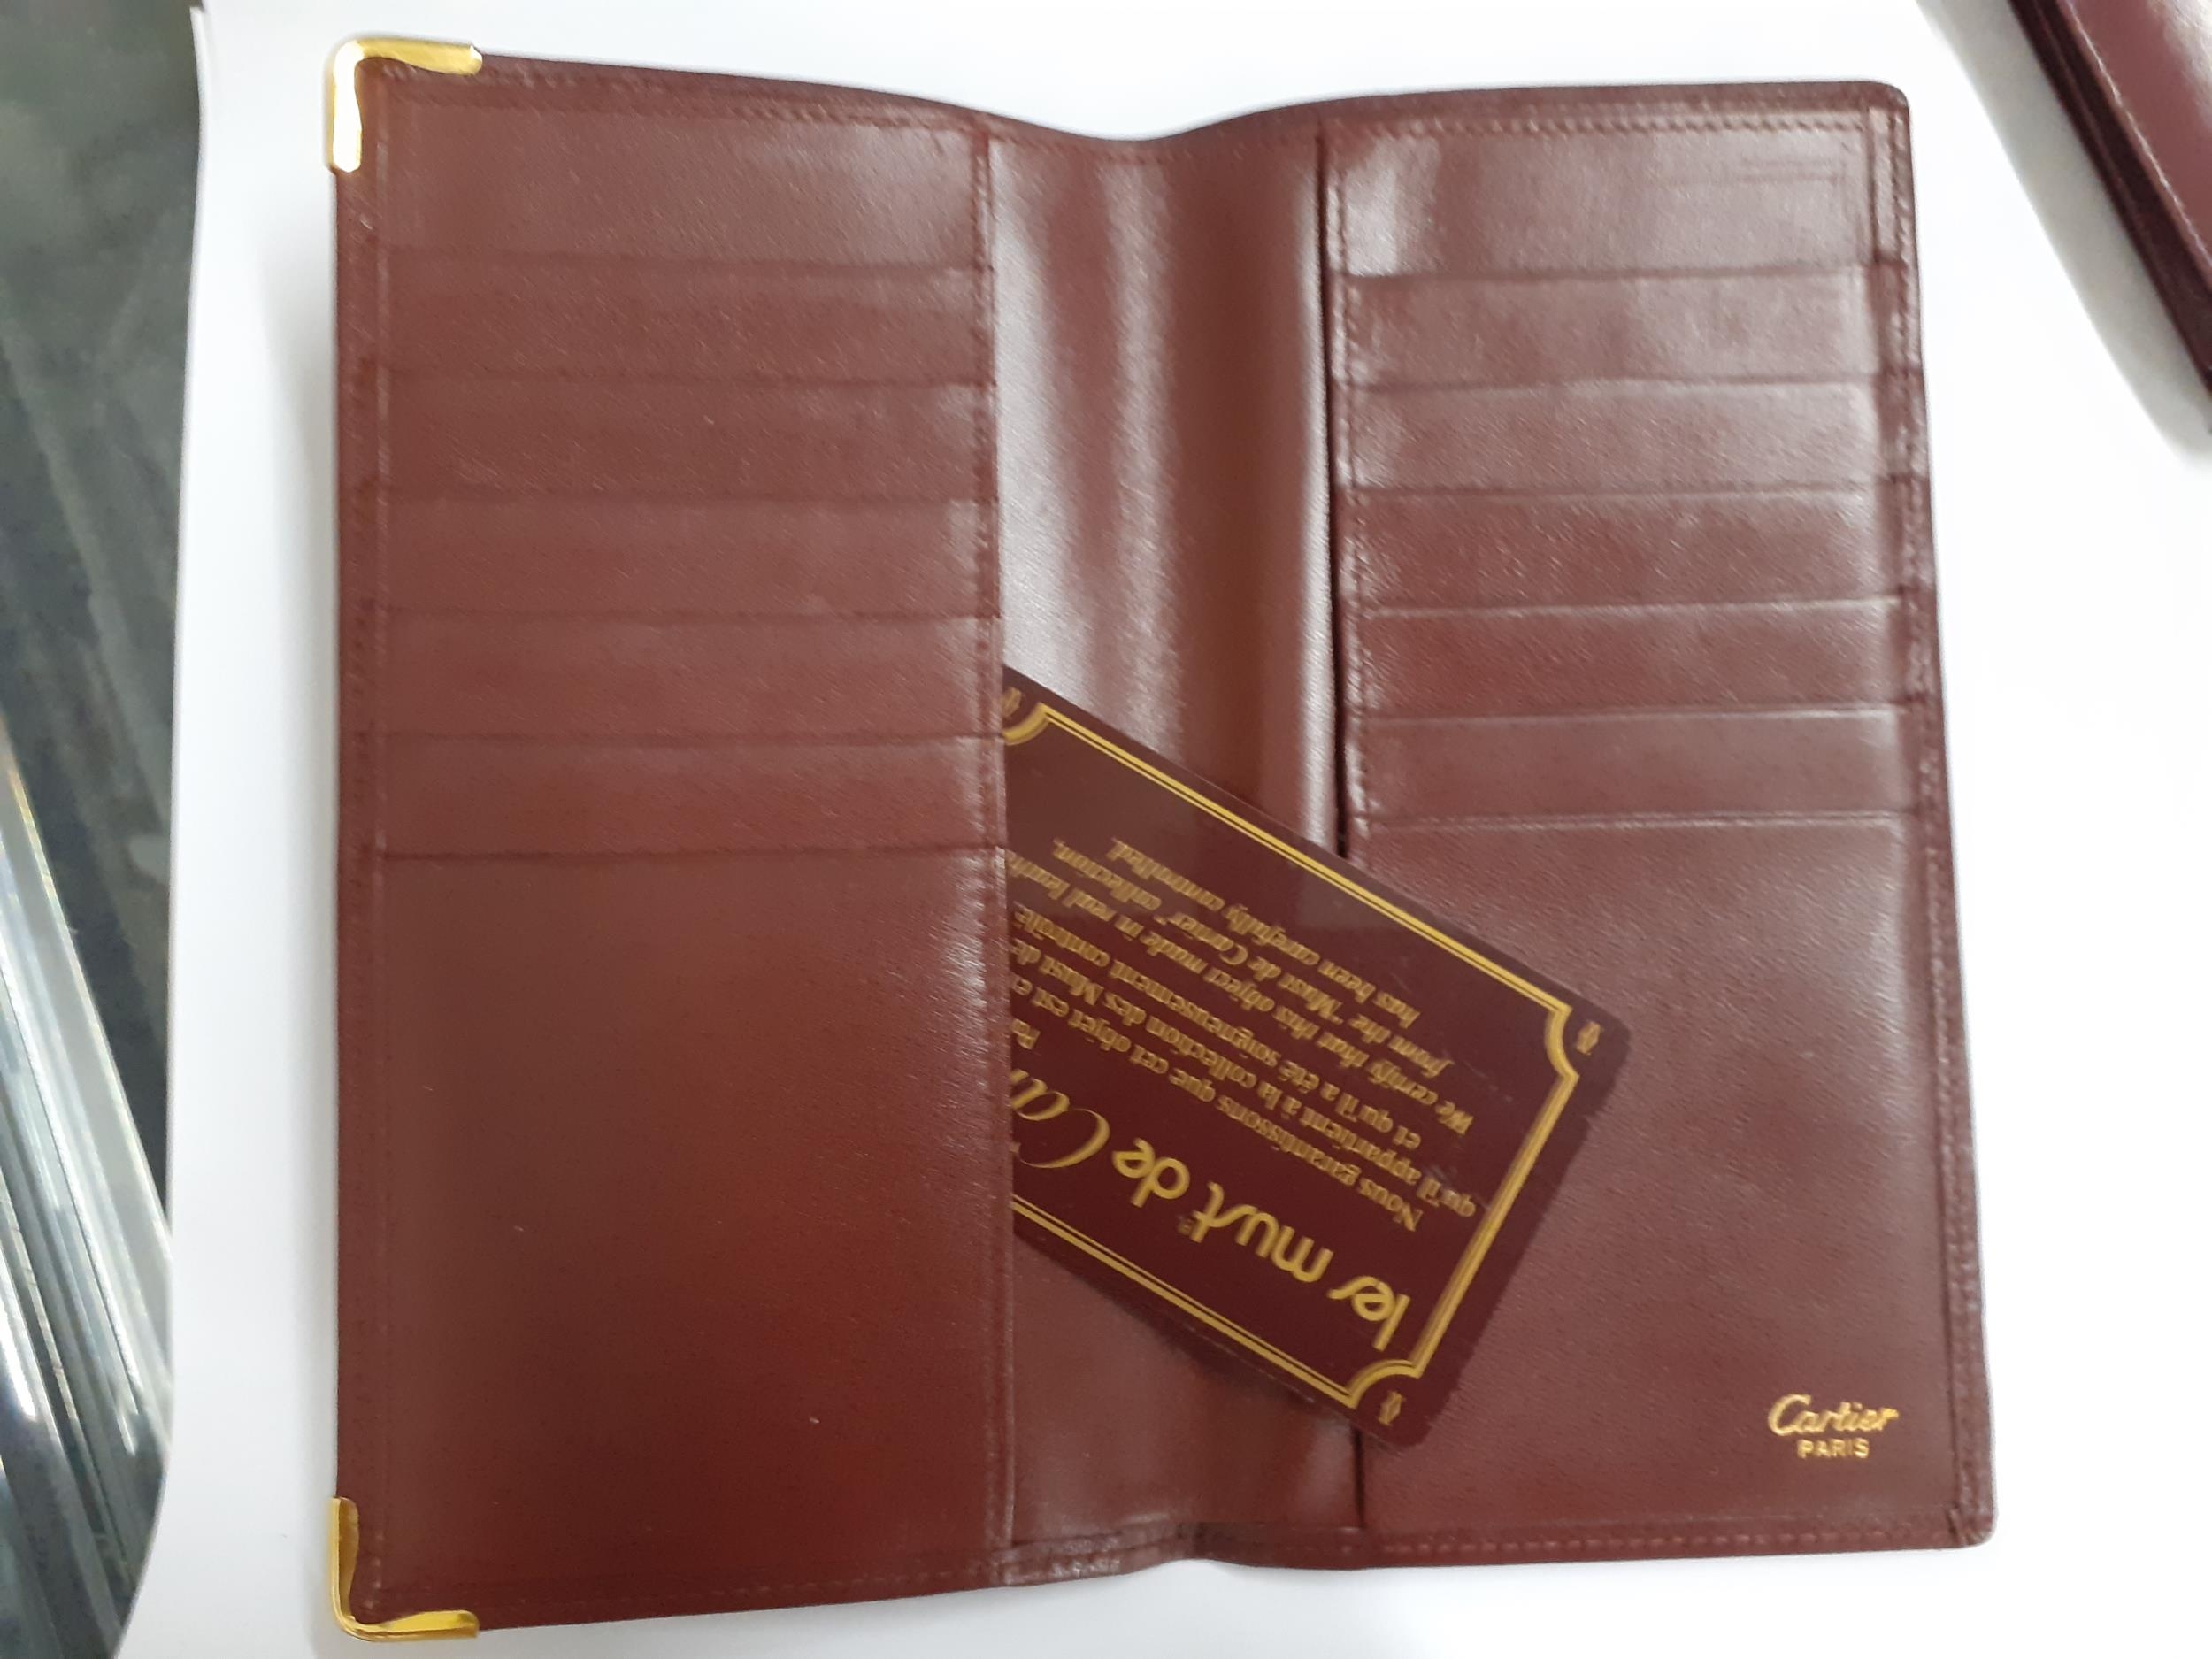 Must de Cartier - a vintage burgundy leather card wallet with certificate of authenticity and - Image 2 of 2